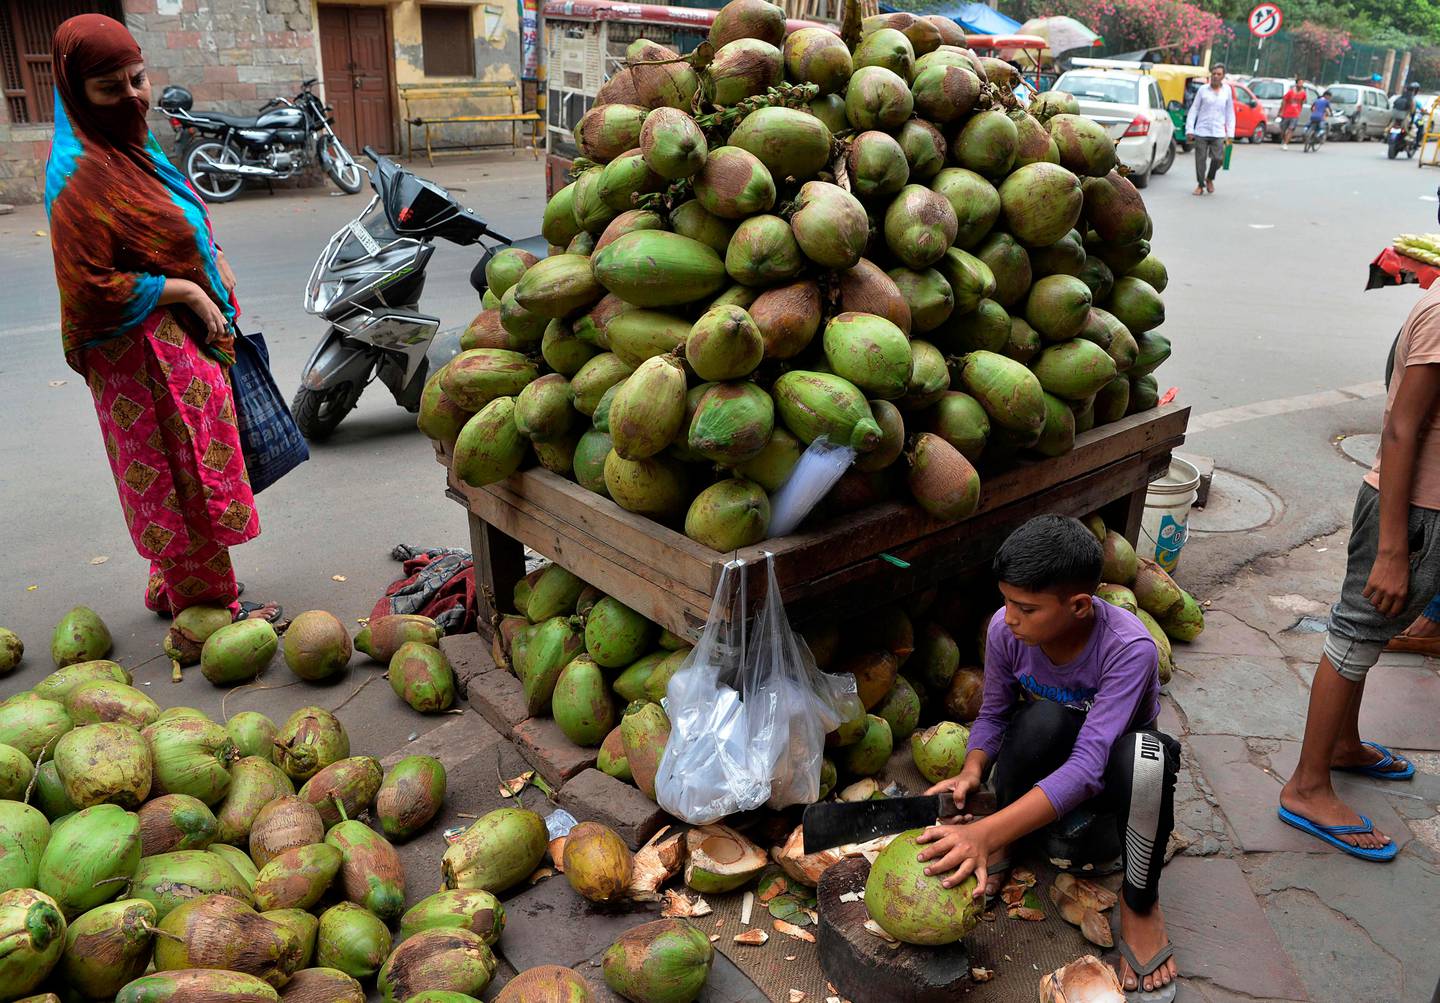 An Indian vendor cuts coconuts for a customer at a roadside in the old quarters of New Delhi on July 14, 2019. - Coconut water is in high demand during the summer months in India. (Photo by Sajjad HUSSAIN / AFP)